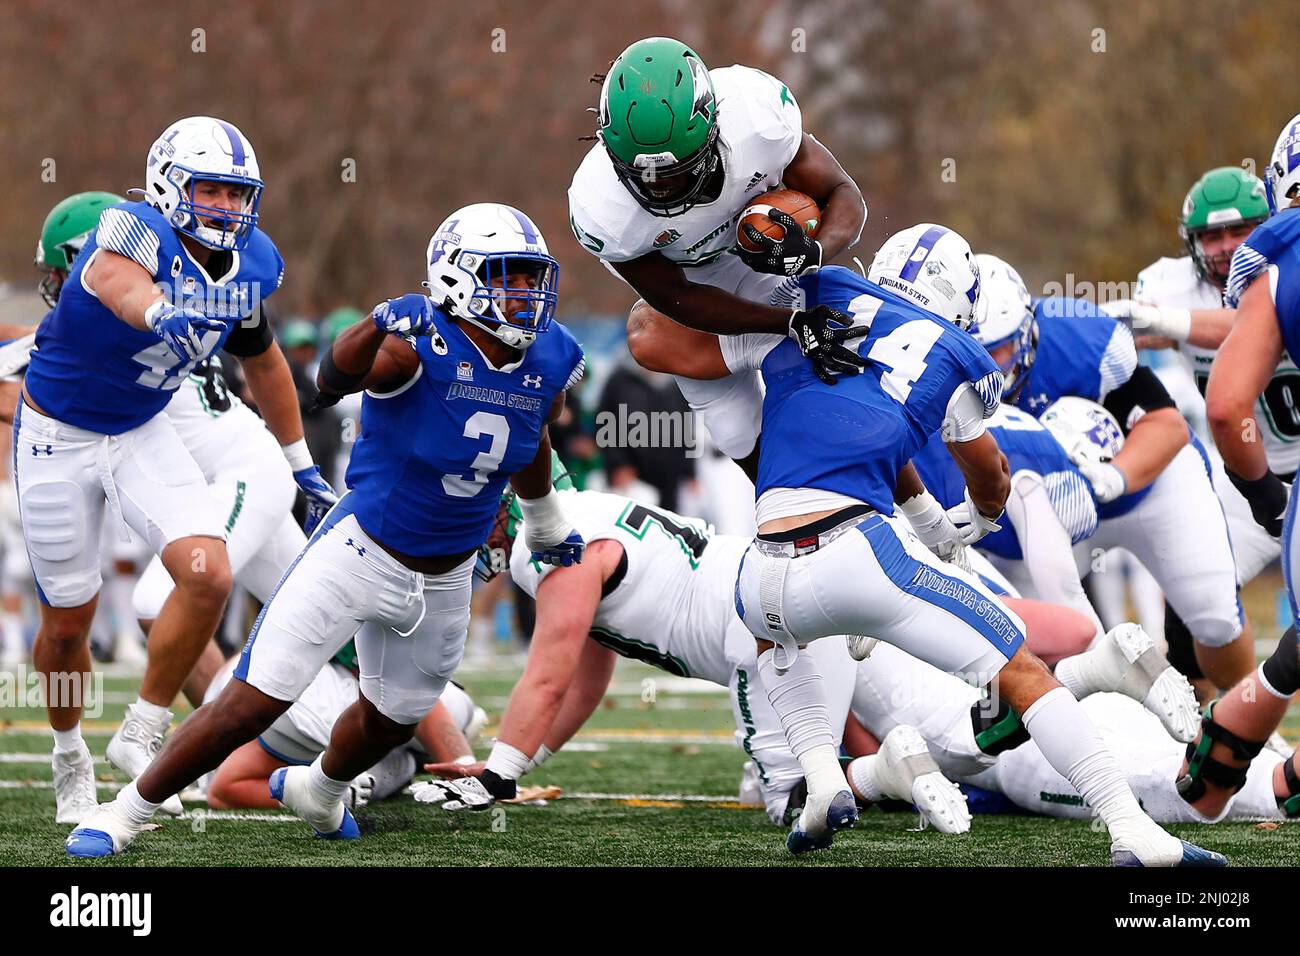 TERRE HAUTE, IN - NOVEMBER 05: North Dakota Fighting Hawks running back  Isaiah Smith (29) tires to jump over Indiana State Sycamores defensive back  Kaleal Davis (14) during a College football game